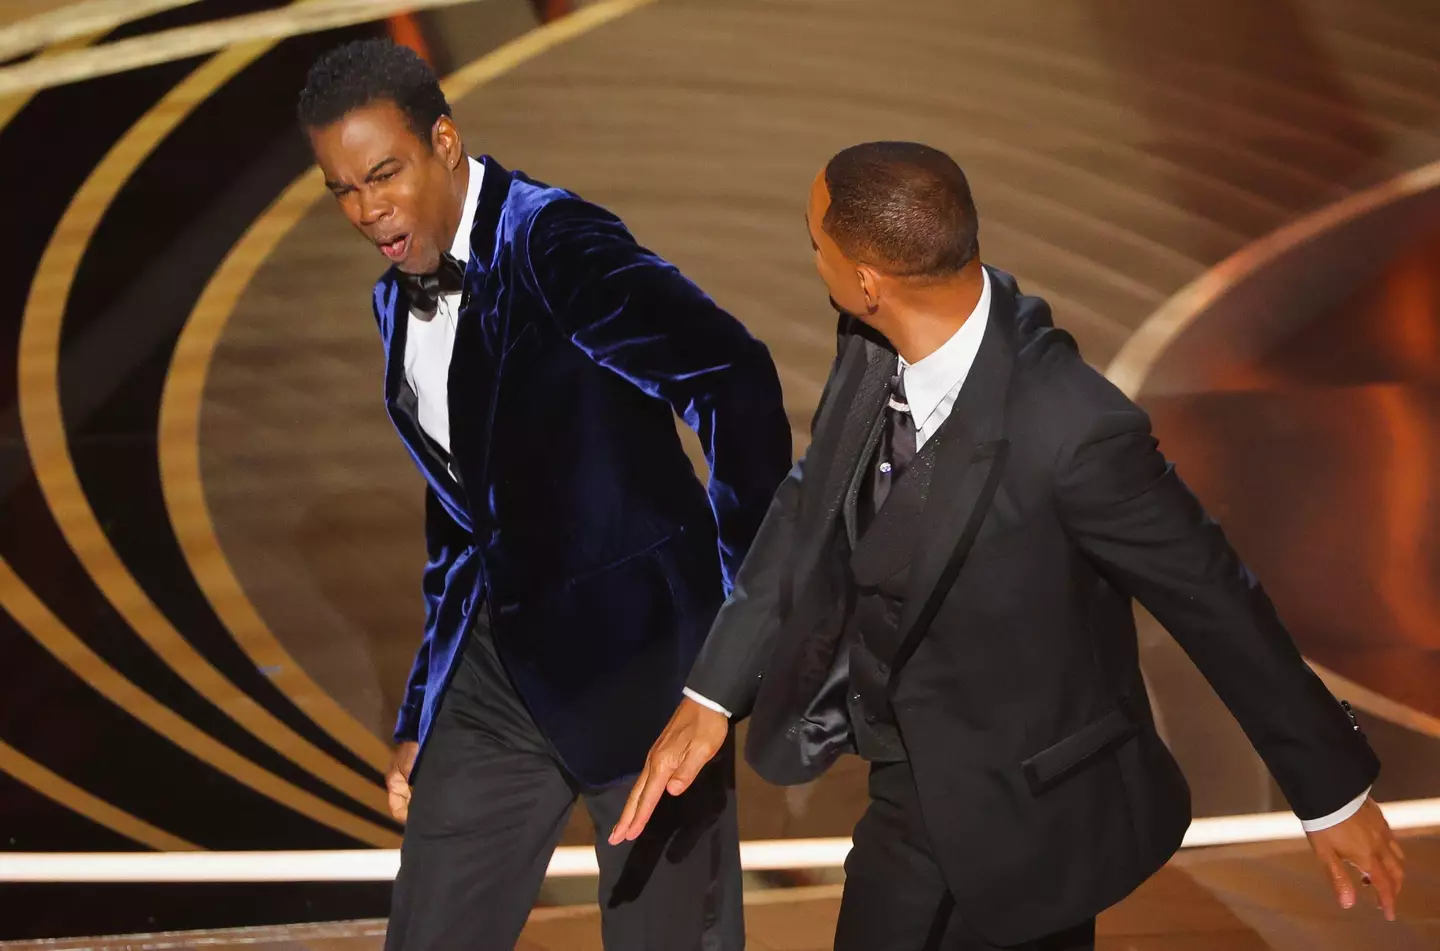 Will Smith confronted Chris Rock on stage at the Oscars. (